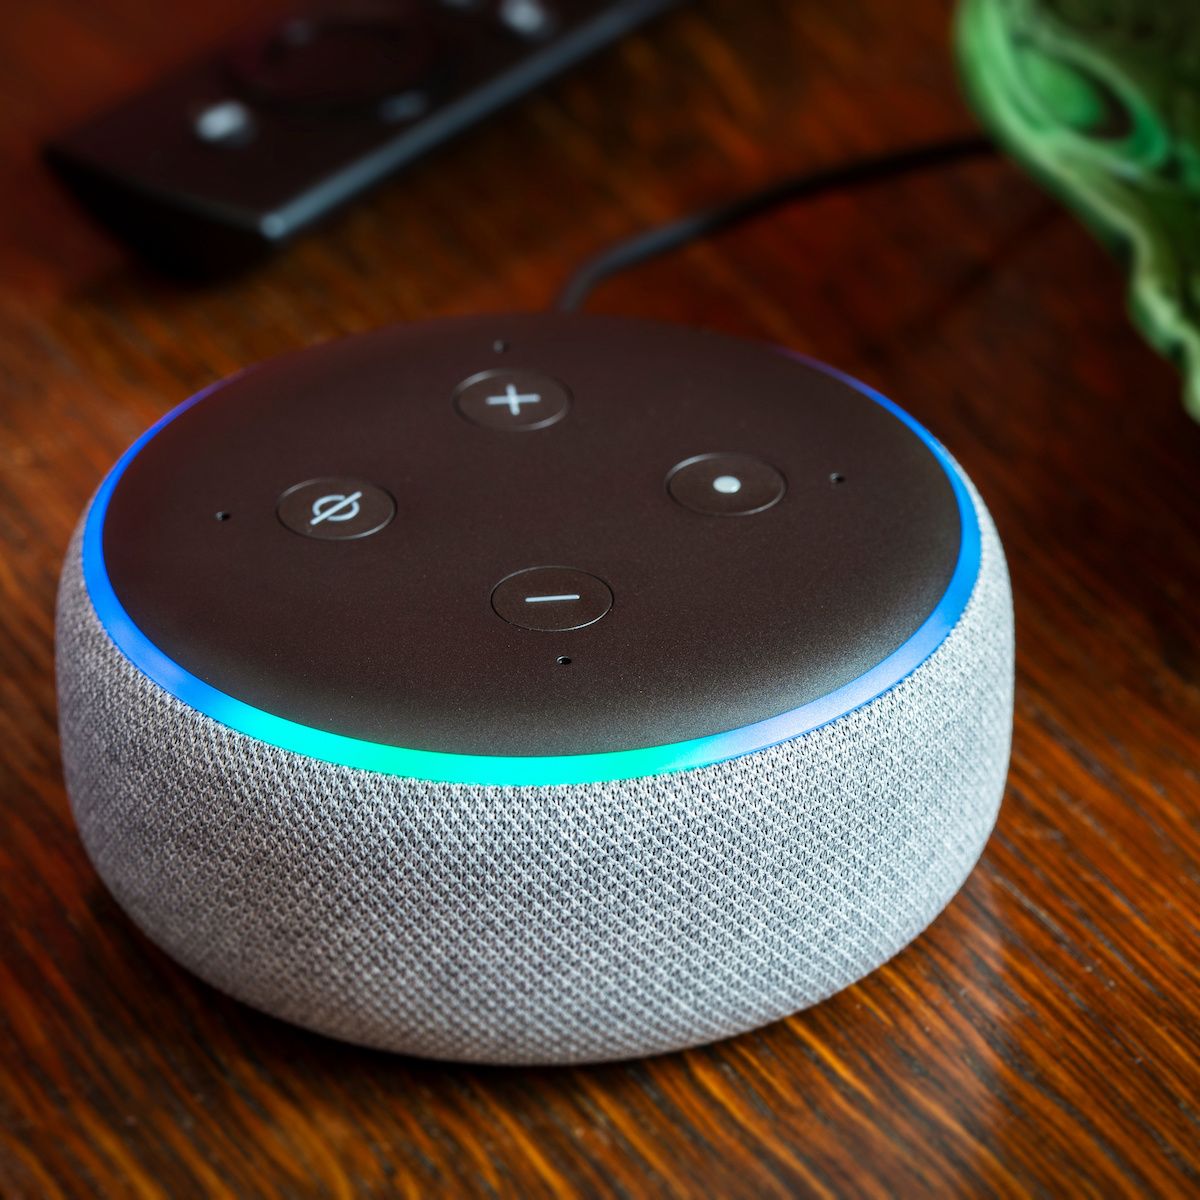 A close-up photo of a 3rd generation Amazon Echo Dot — if you own one of these, you should opt out of Amazon Sidewalk Wi-Fi sharing.